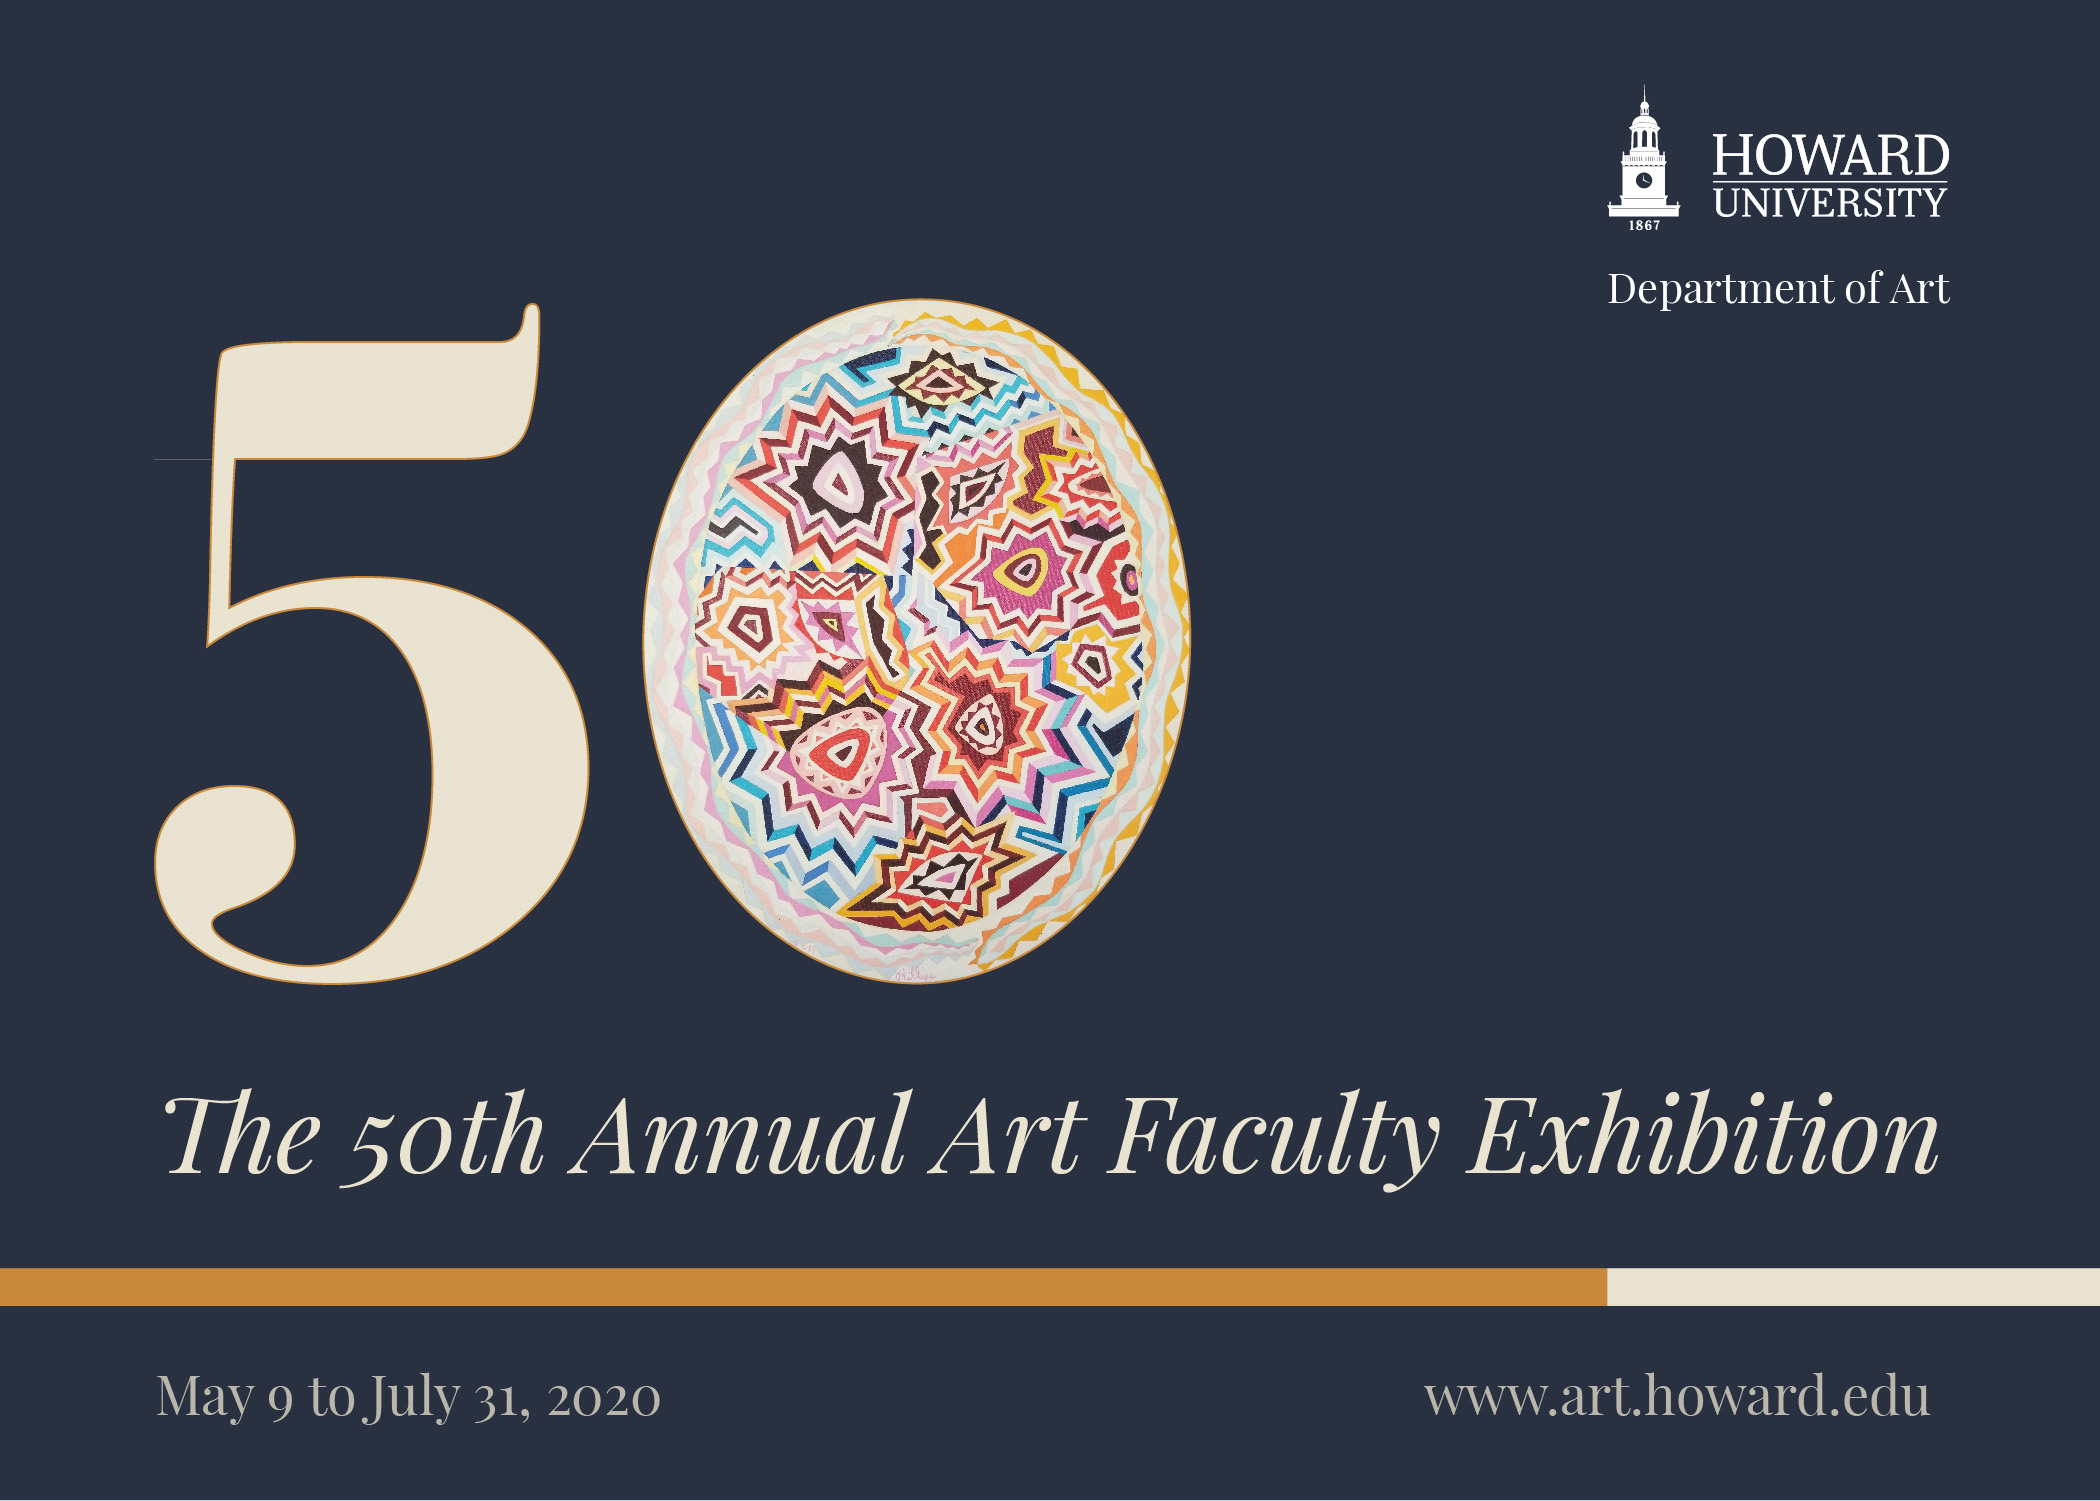 The 50th Annual Art Faculty Exhibition